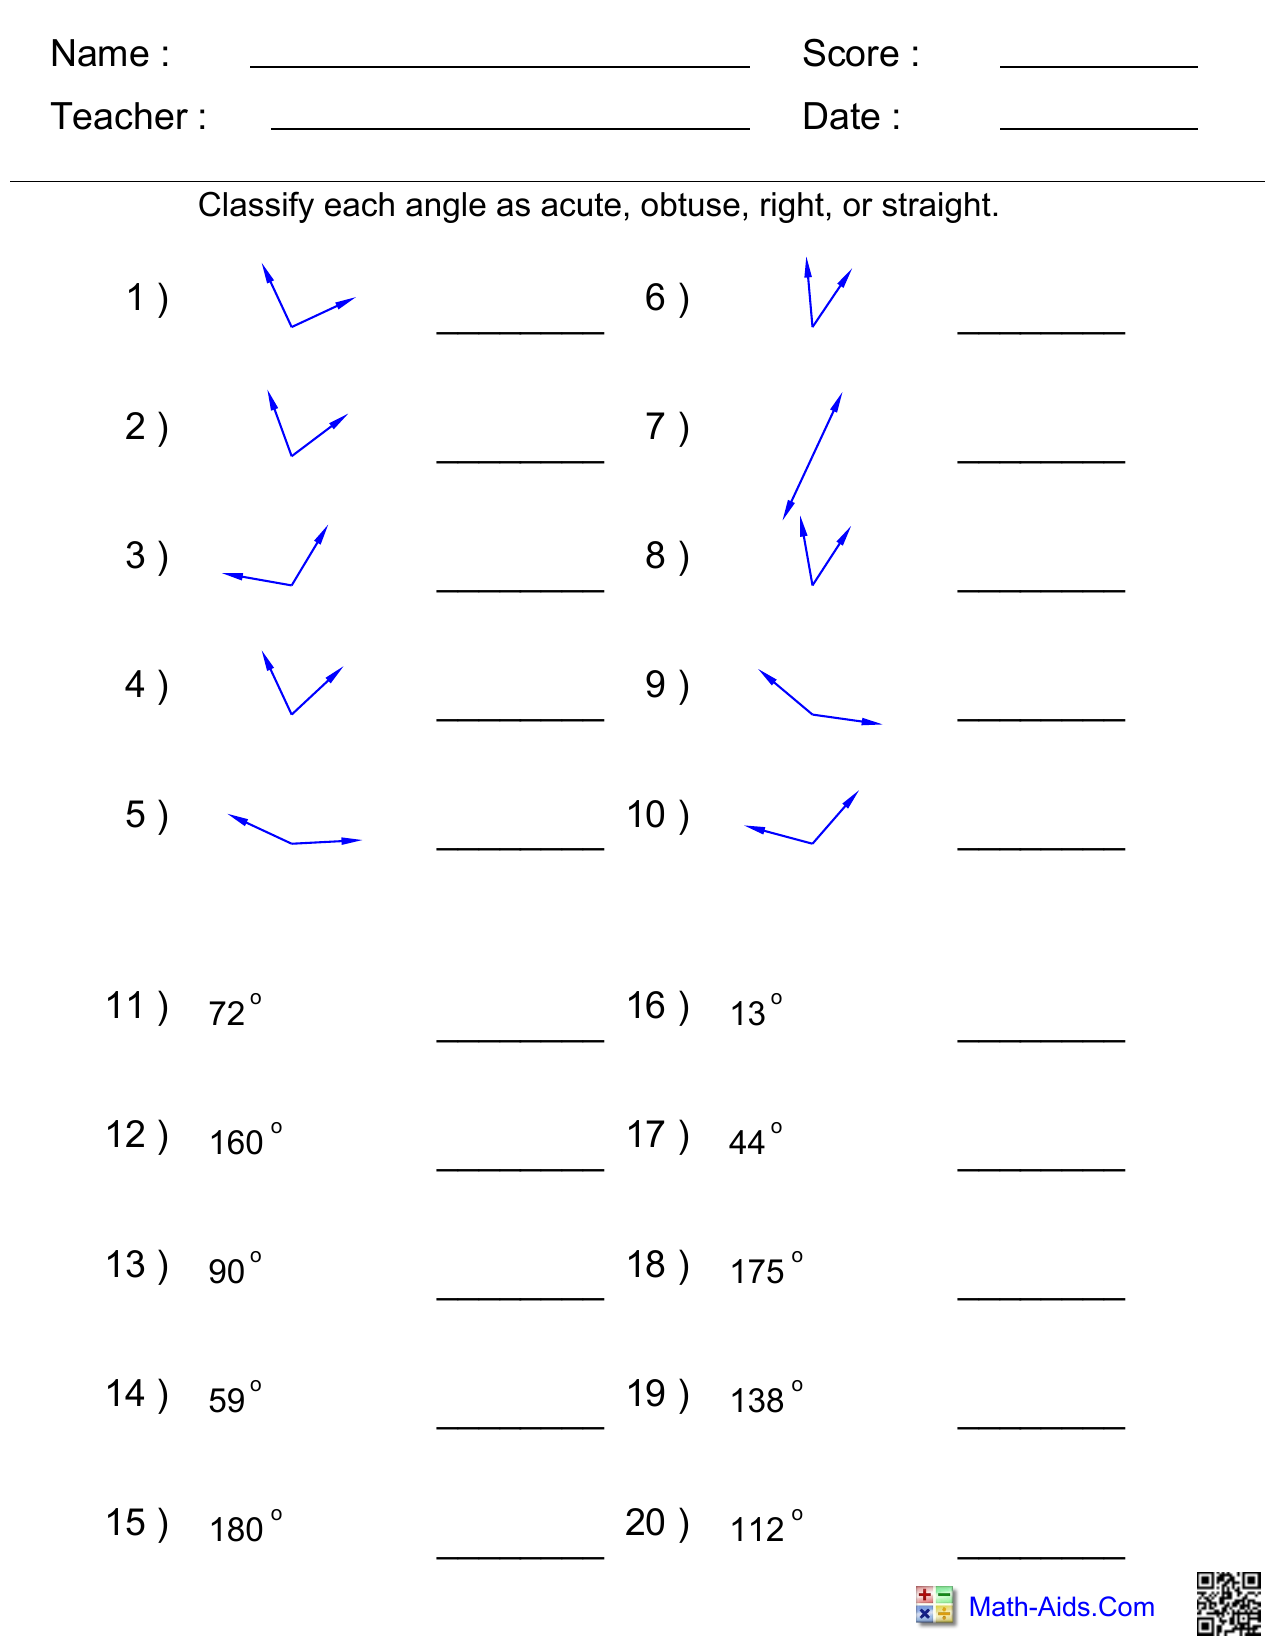 types-of-angles-worksheet-with-answers